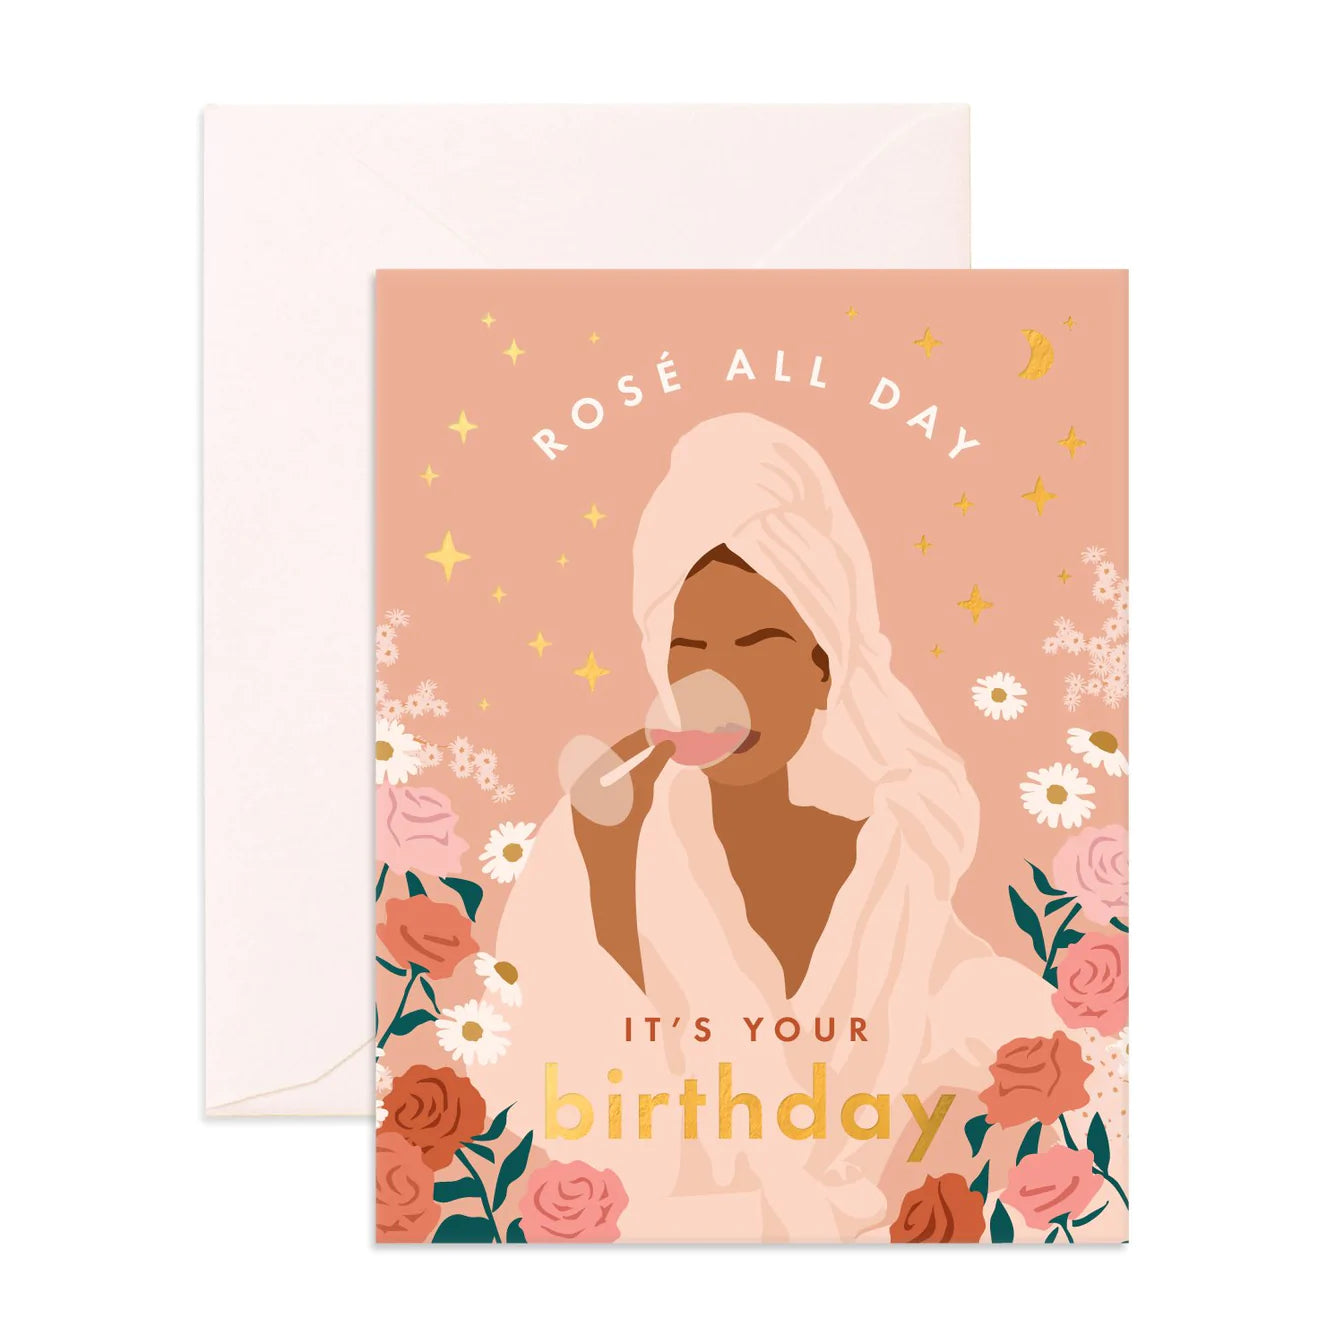 Rose All Day Greeting Card